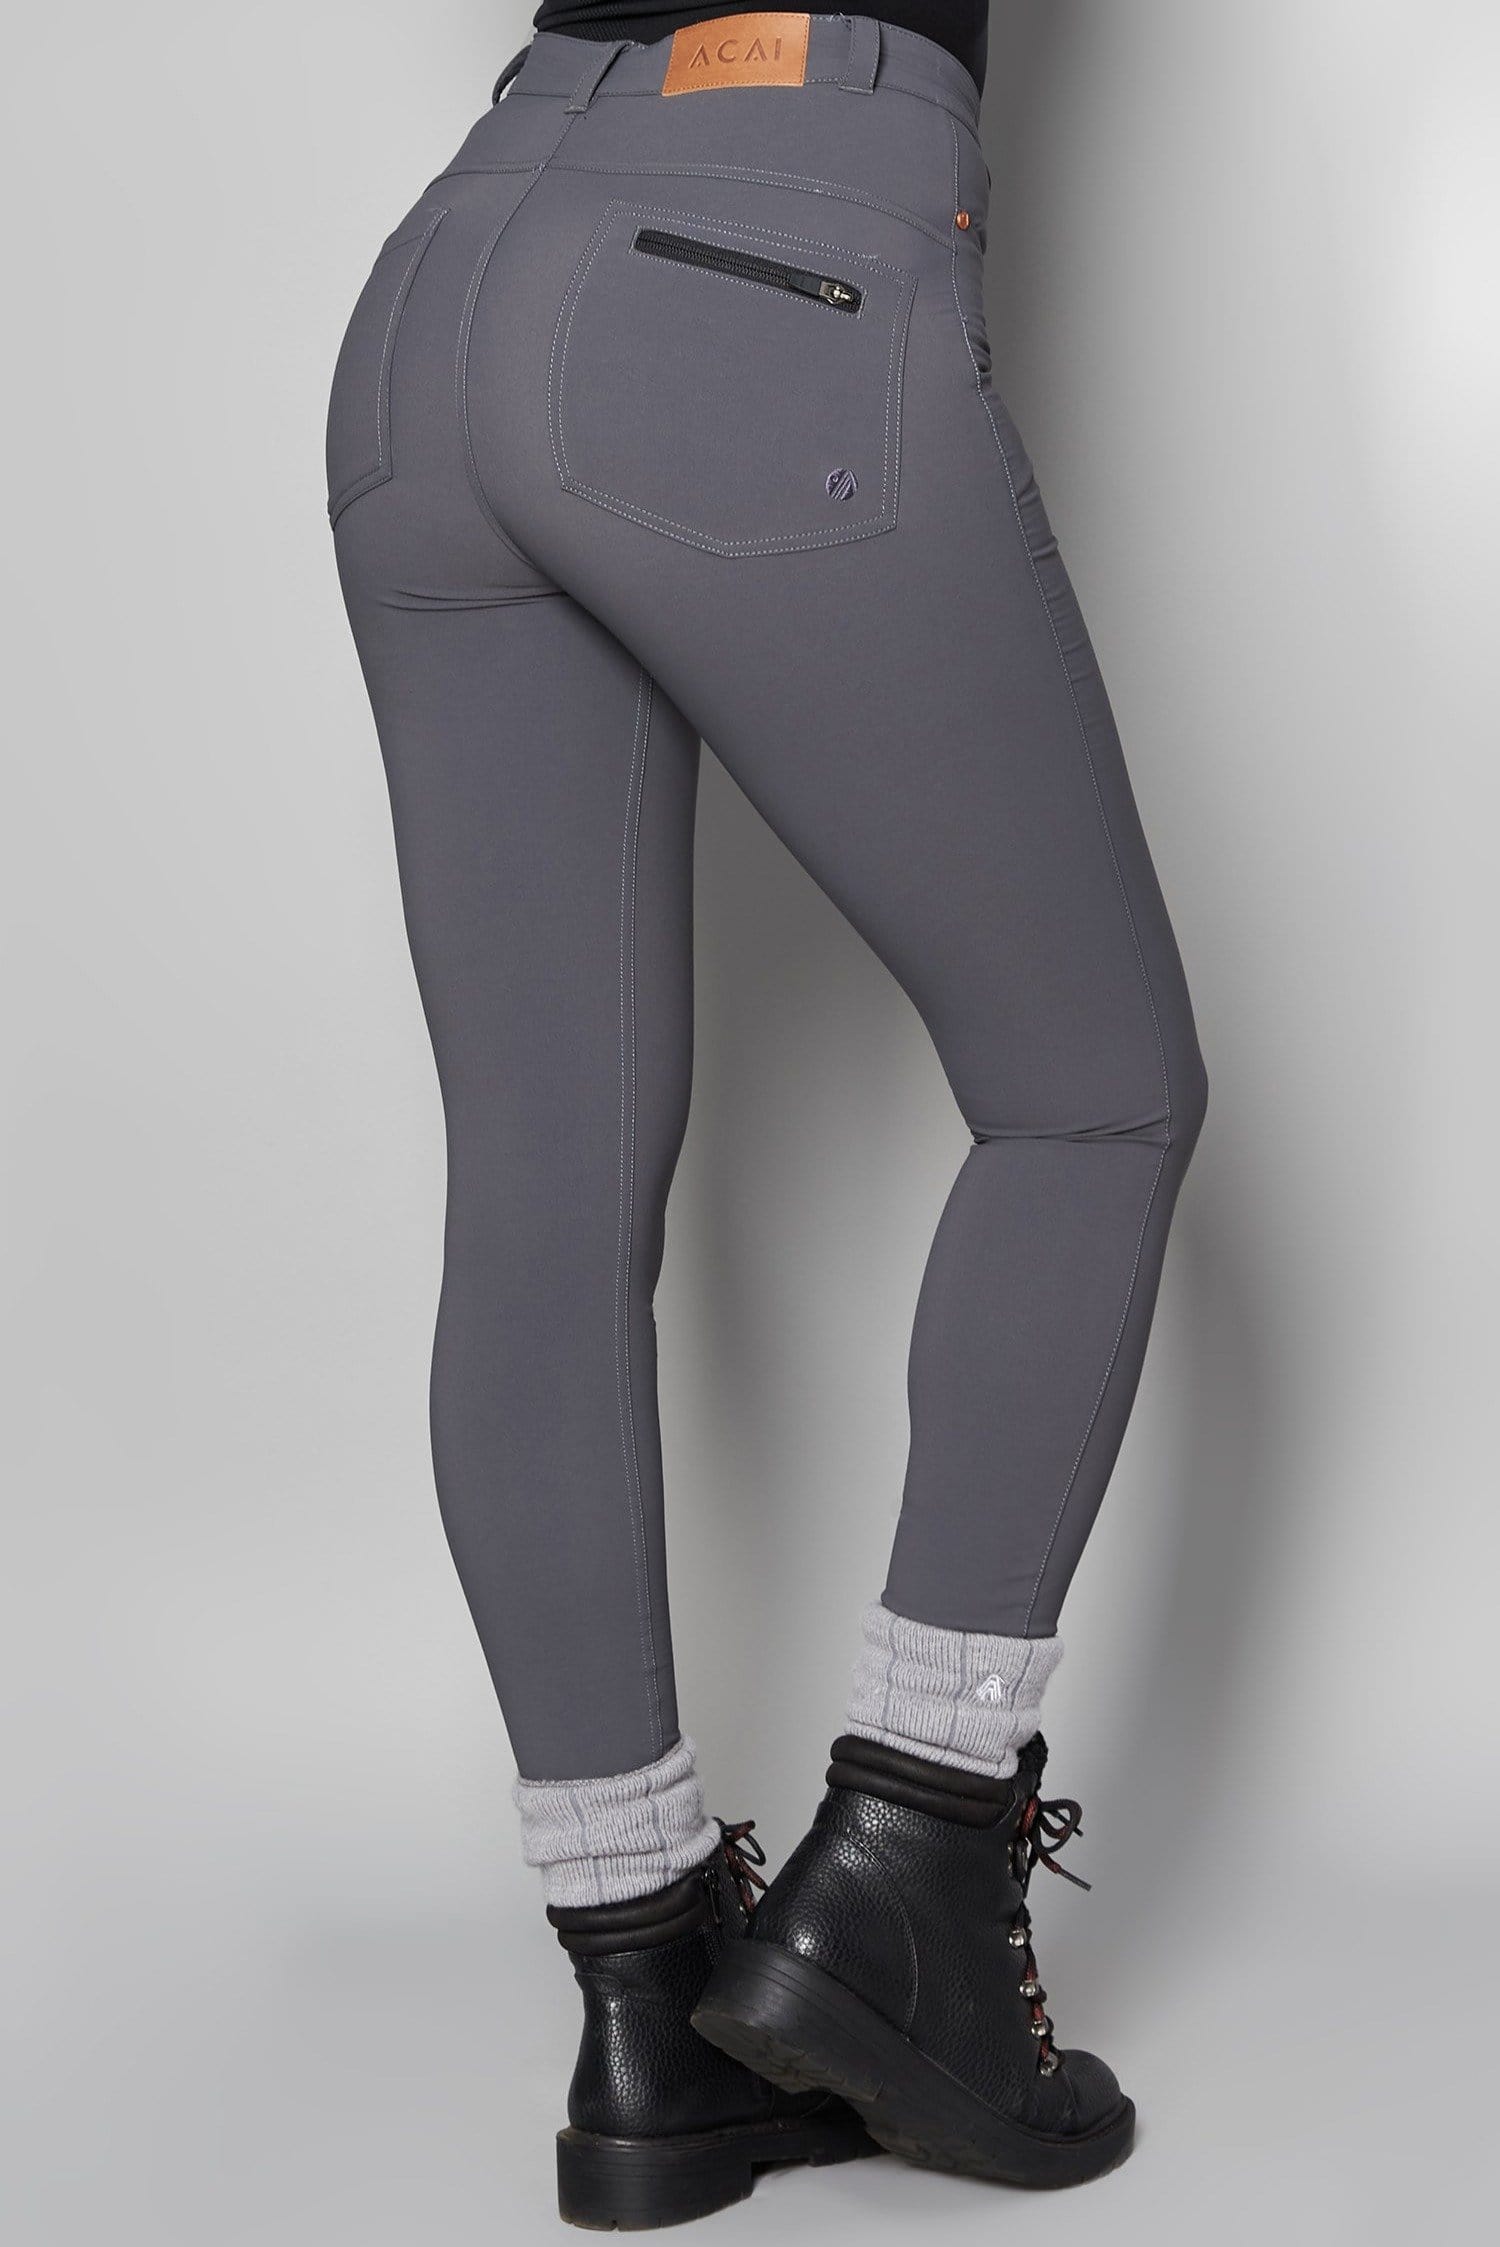 Max Stretch Skinny Outdoor Trousers - Storm Grey - 32r / Uk14 - Womens - Acai Outdoorwear